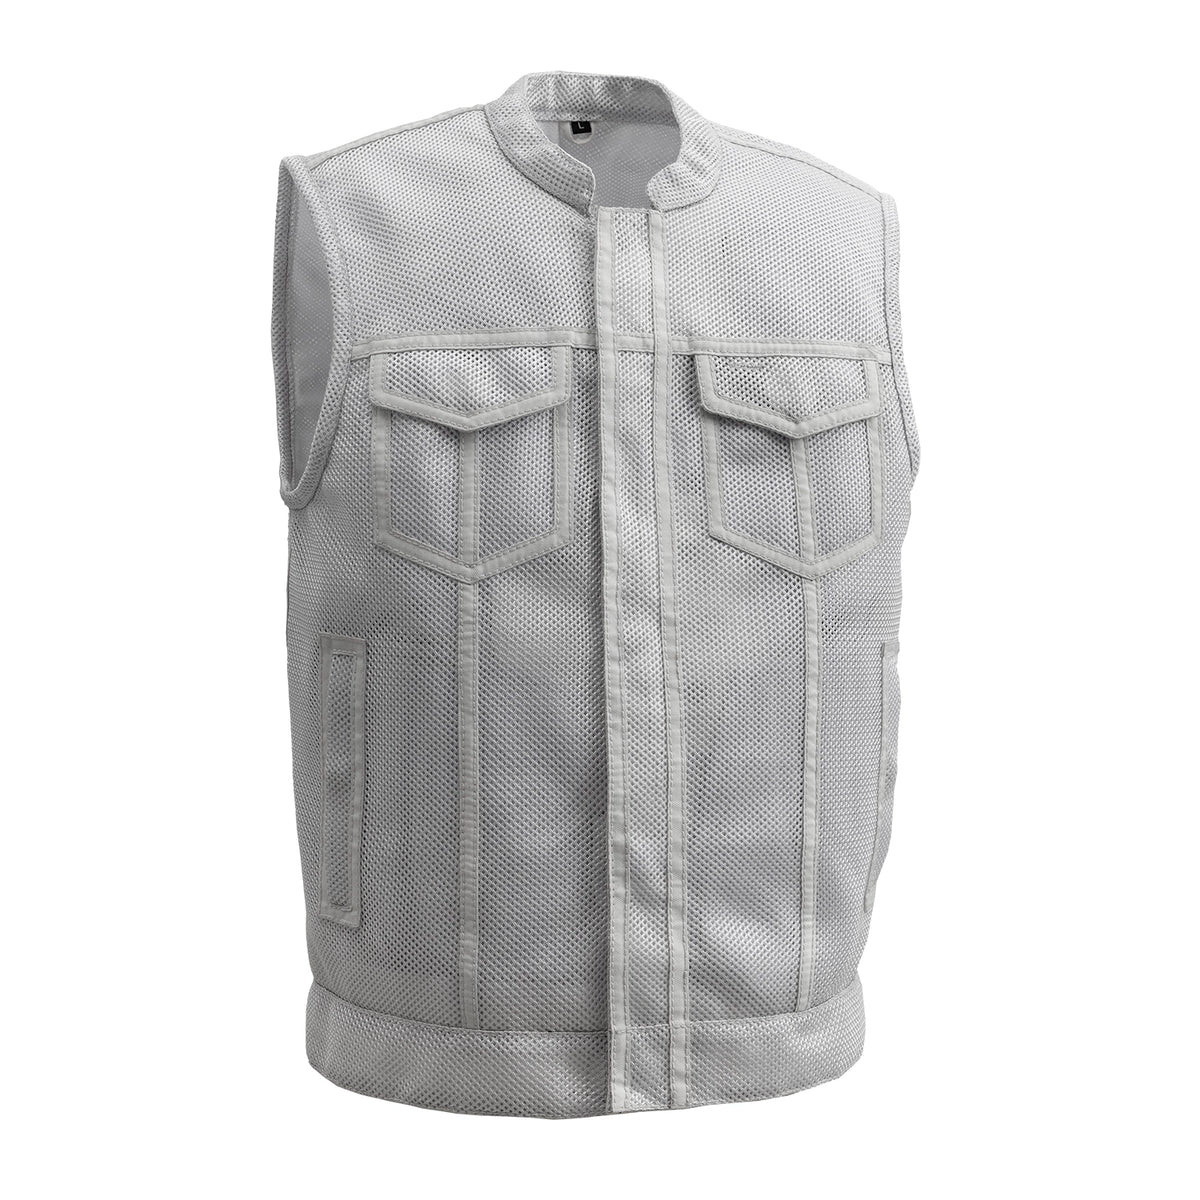 Sharp Shooter Moto Mesh Men's Motorcycle Vest Men's Leather Vest First Manufacturing Company White S 